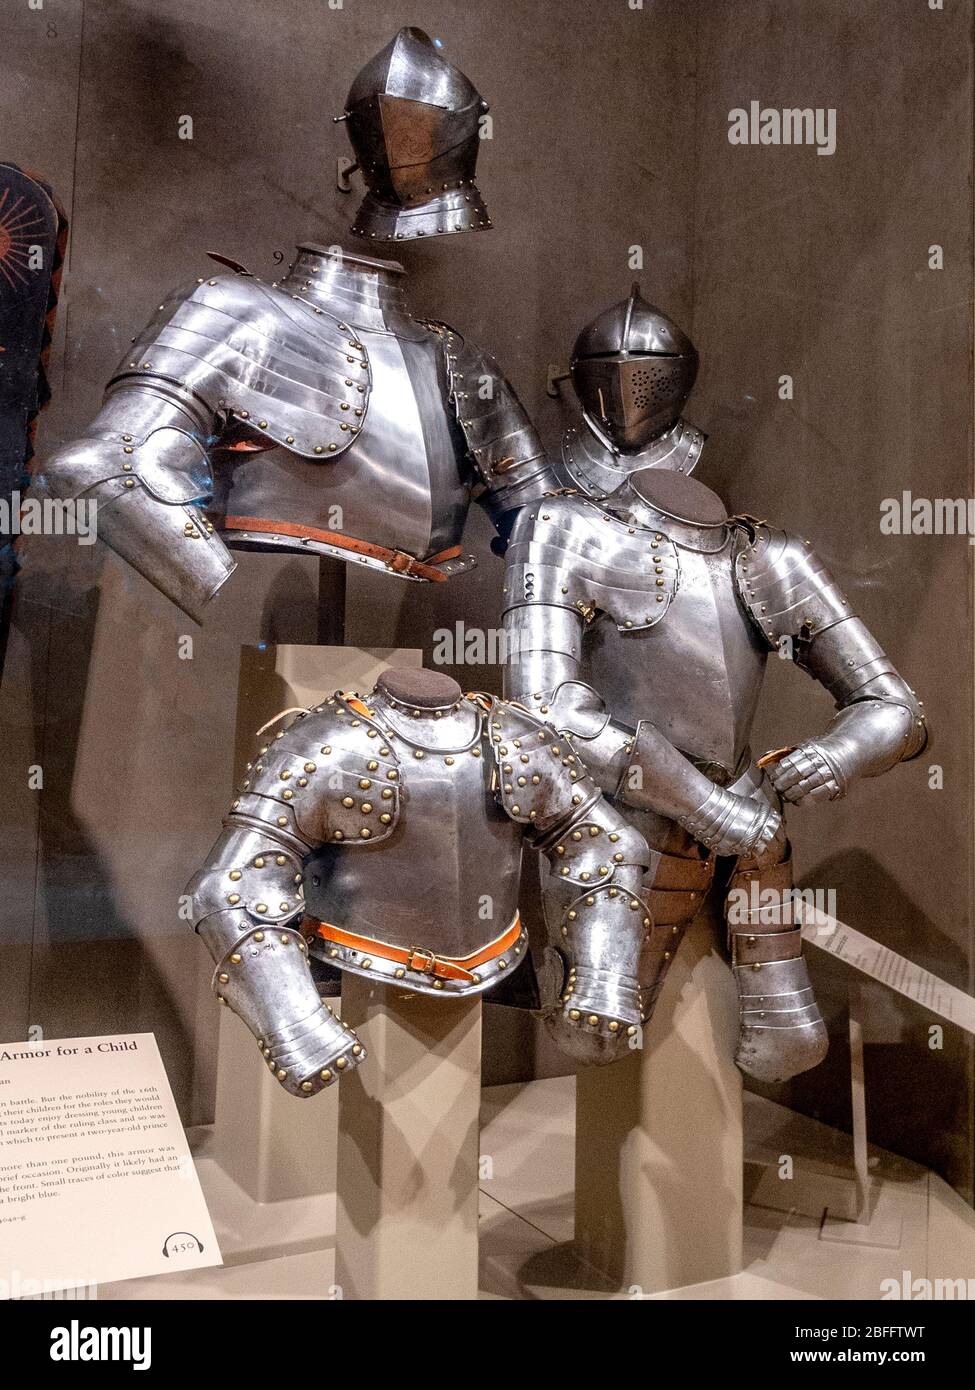 Dating from 1630-50, Italian armor for a toddler boy is exhibited at the Chicago Art Institute. Weighing only a pound, it was worn on formal occasions. Stock Photo